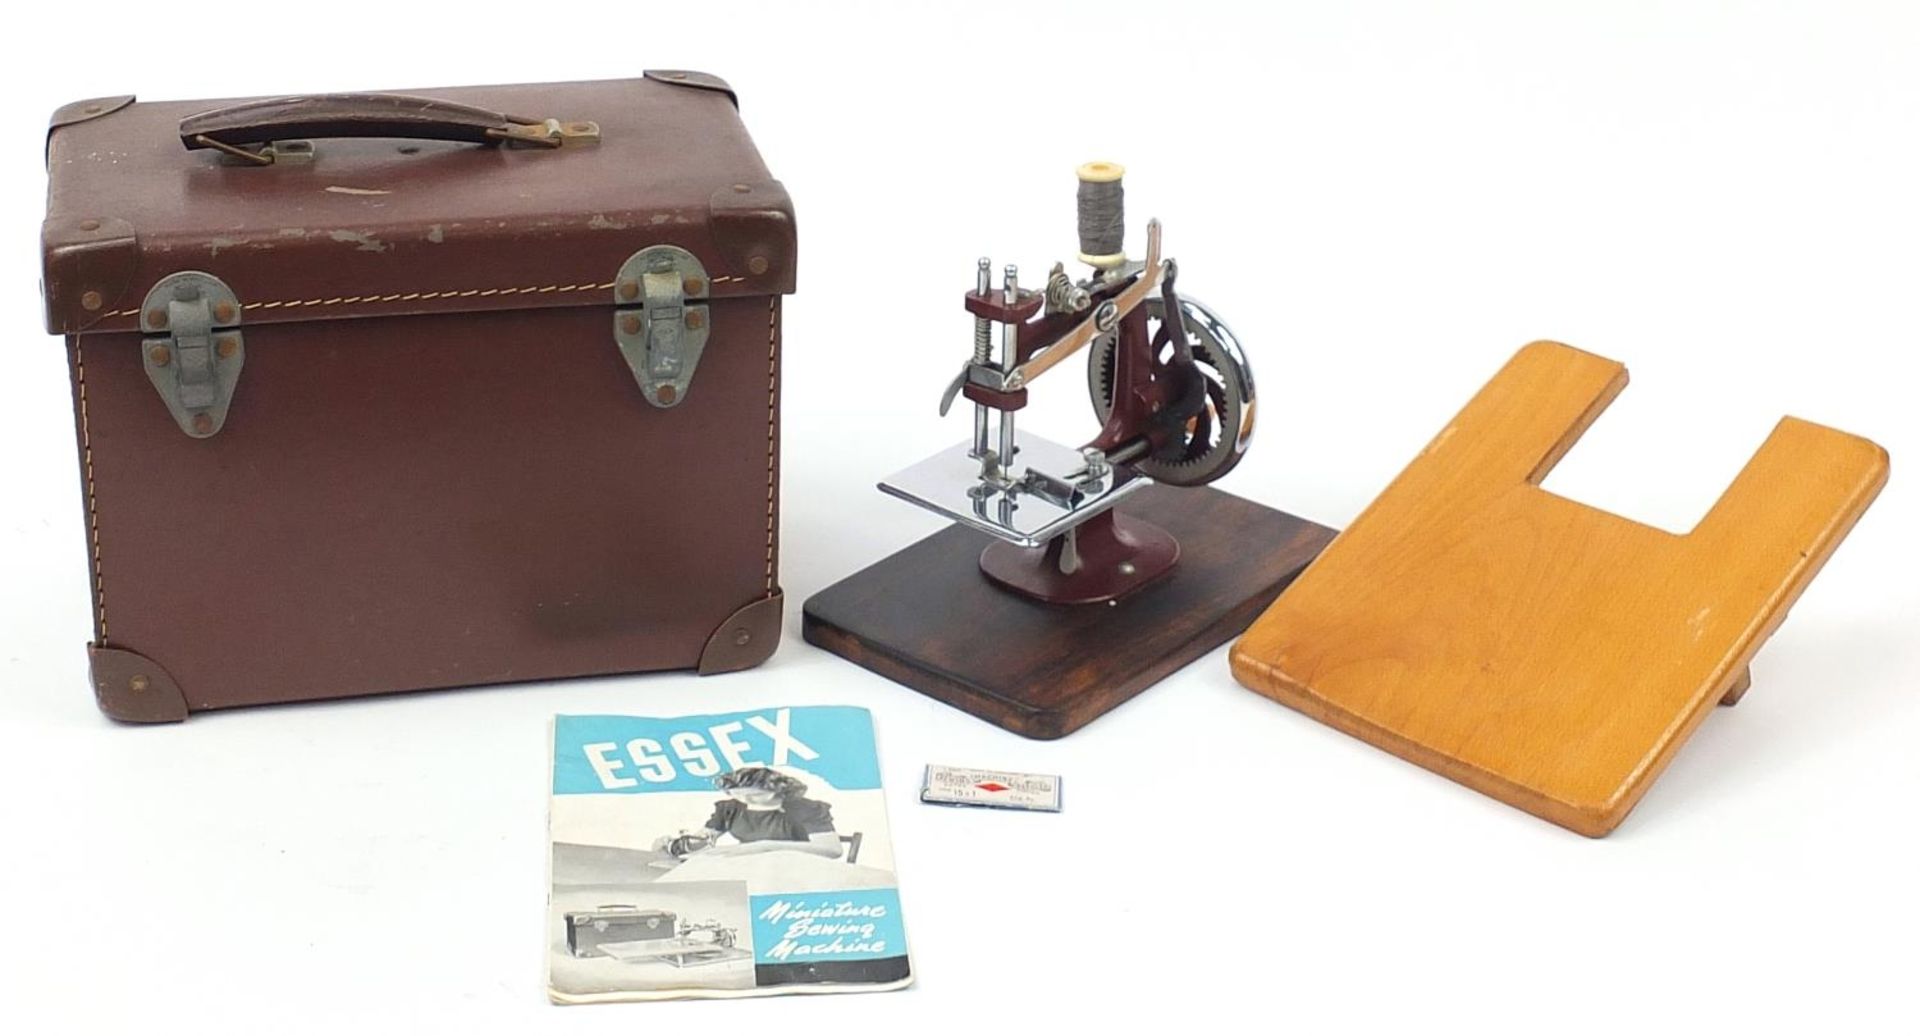 Vintage Essex child's sewing machine with case and instructions